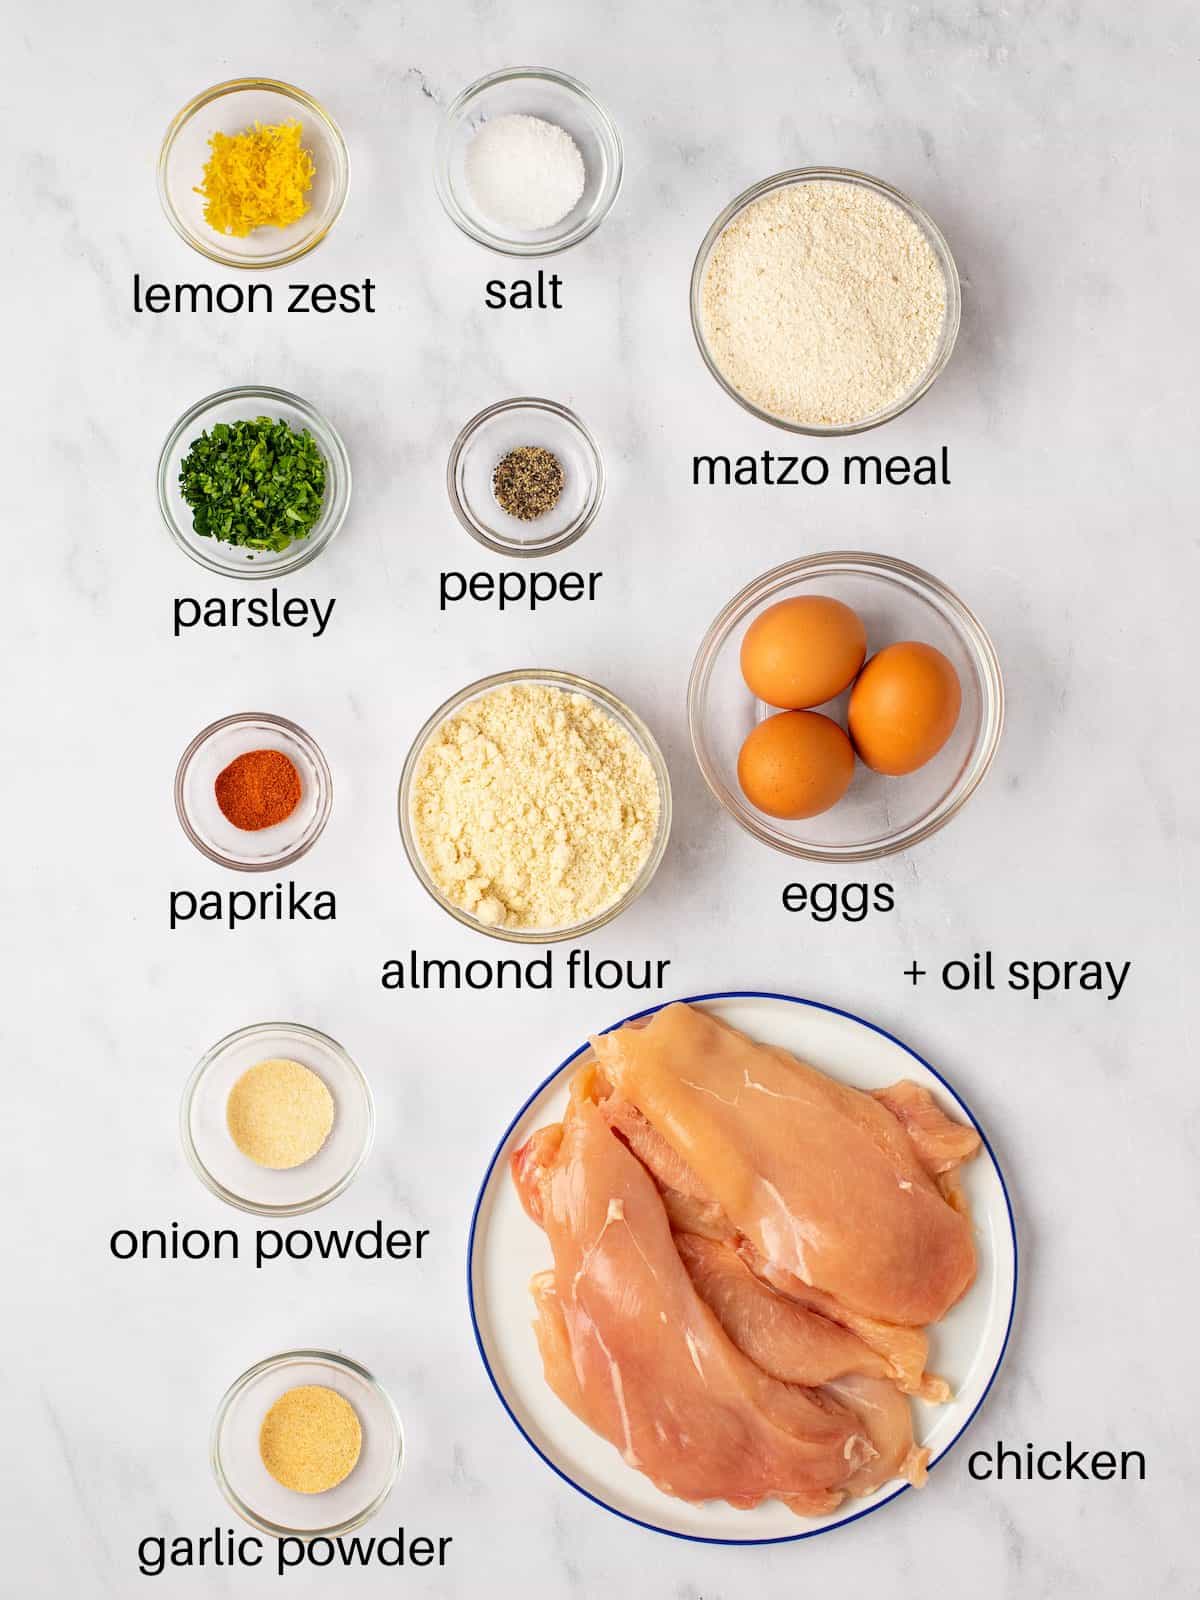 Ingredients needed to baked chicken schnitzel for Passover.